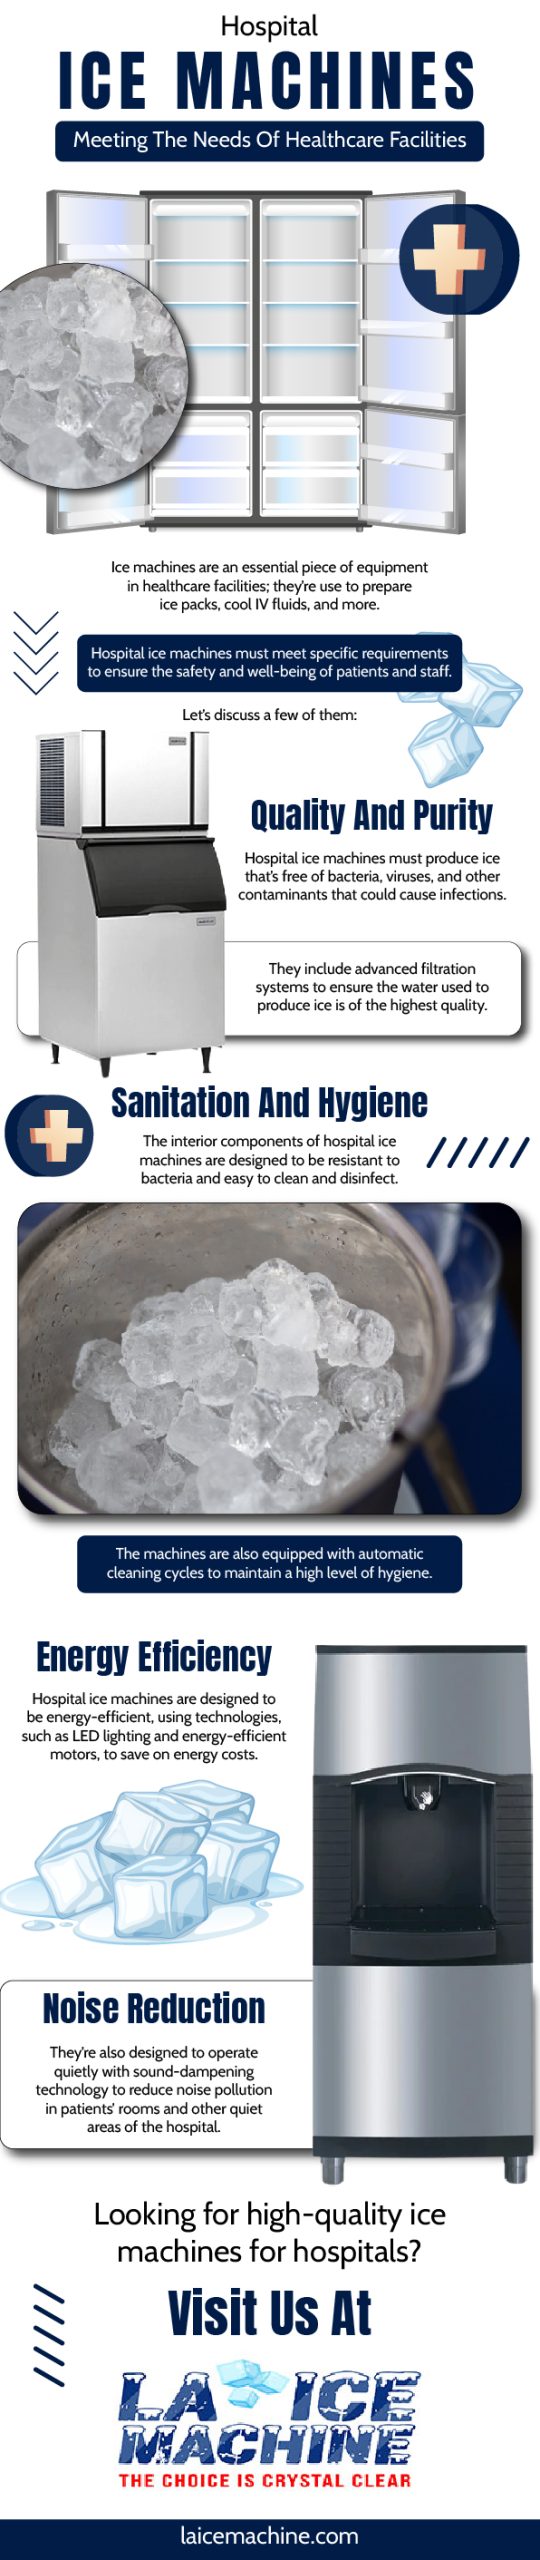 Hospital Ice Machines Meeting The Needs Of Healthcare Facilities